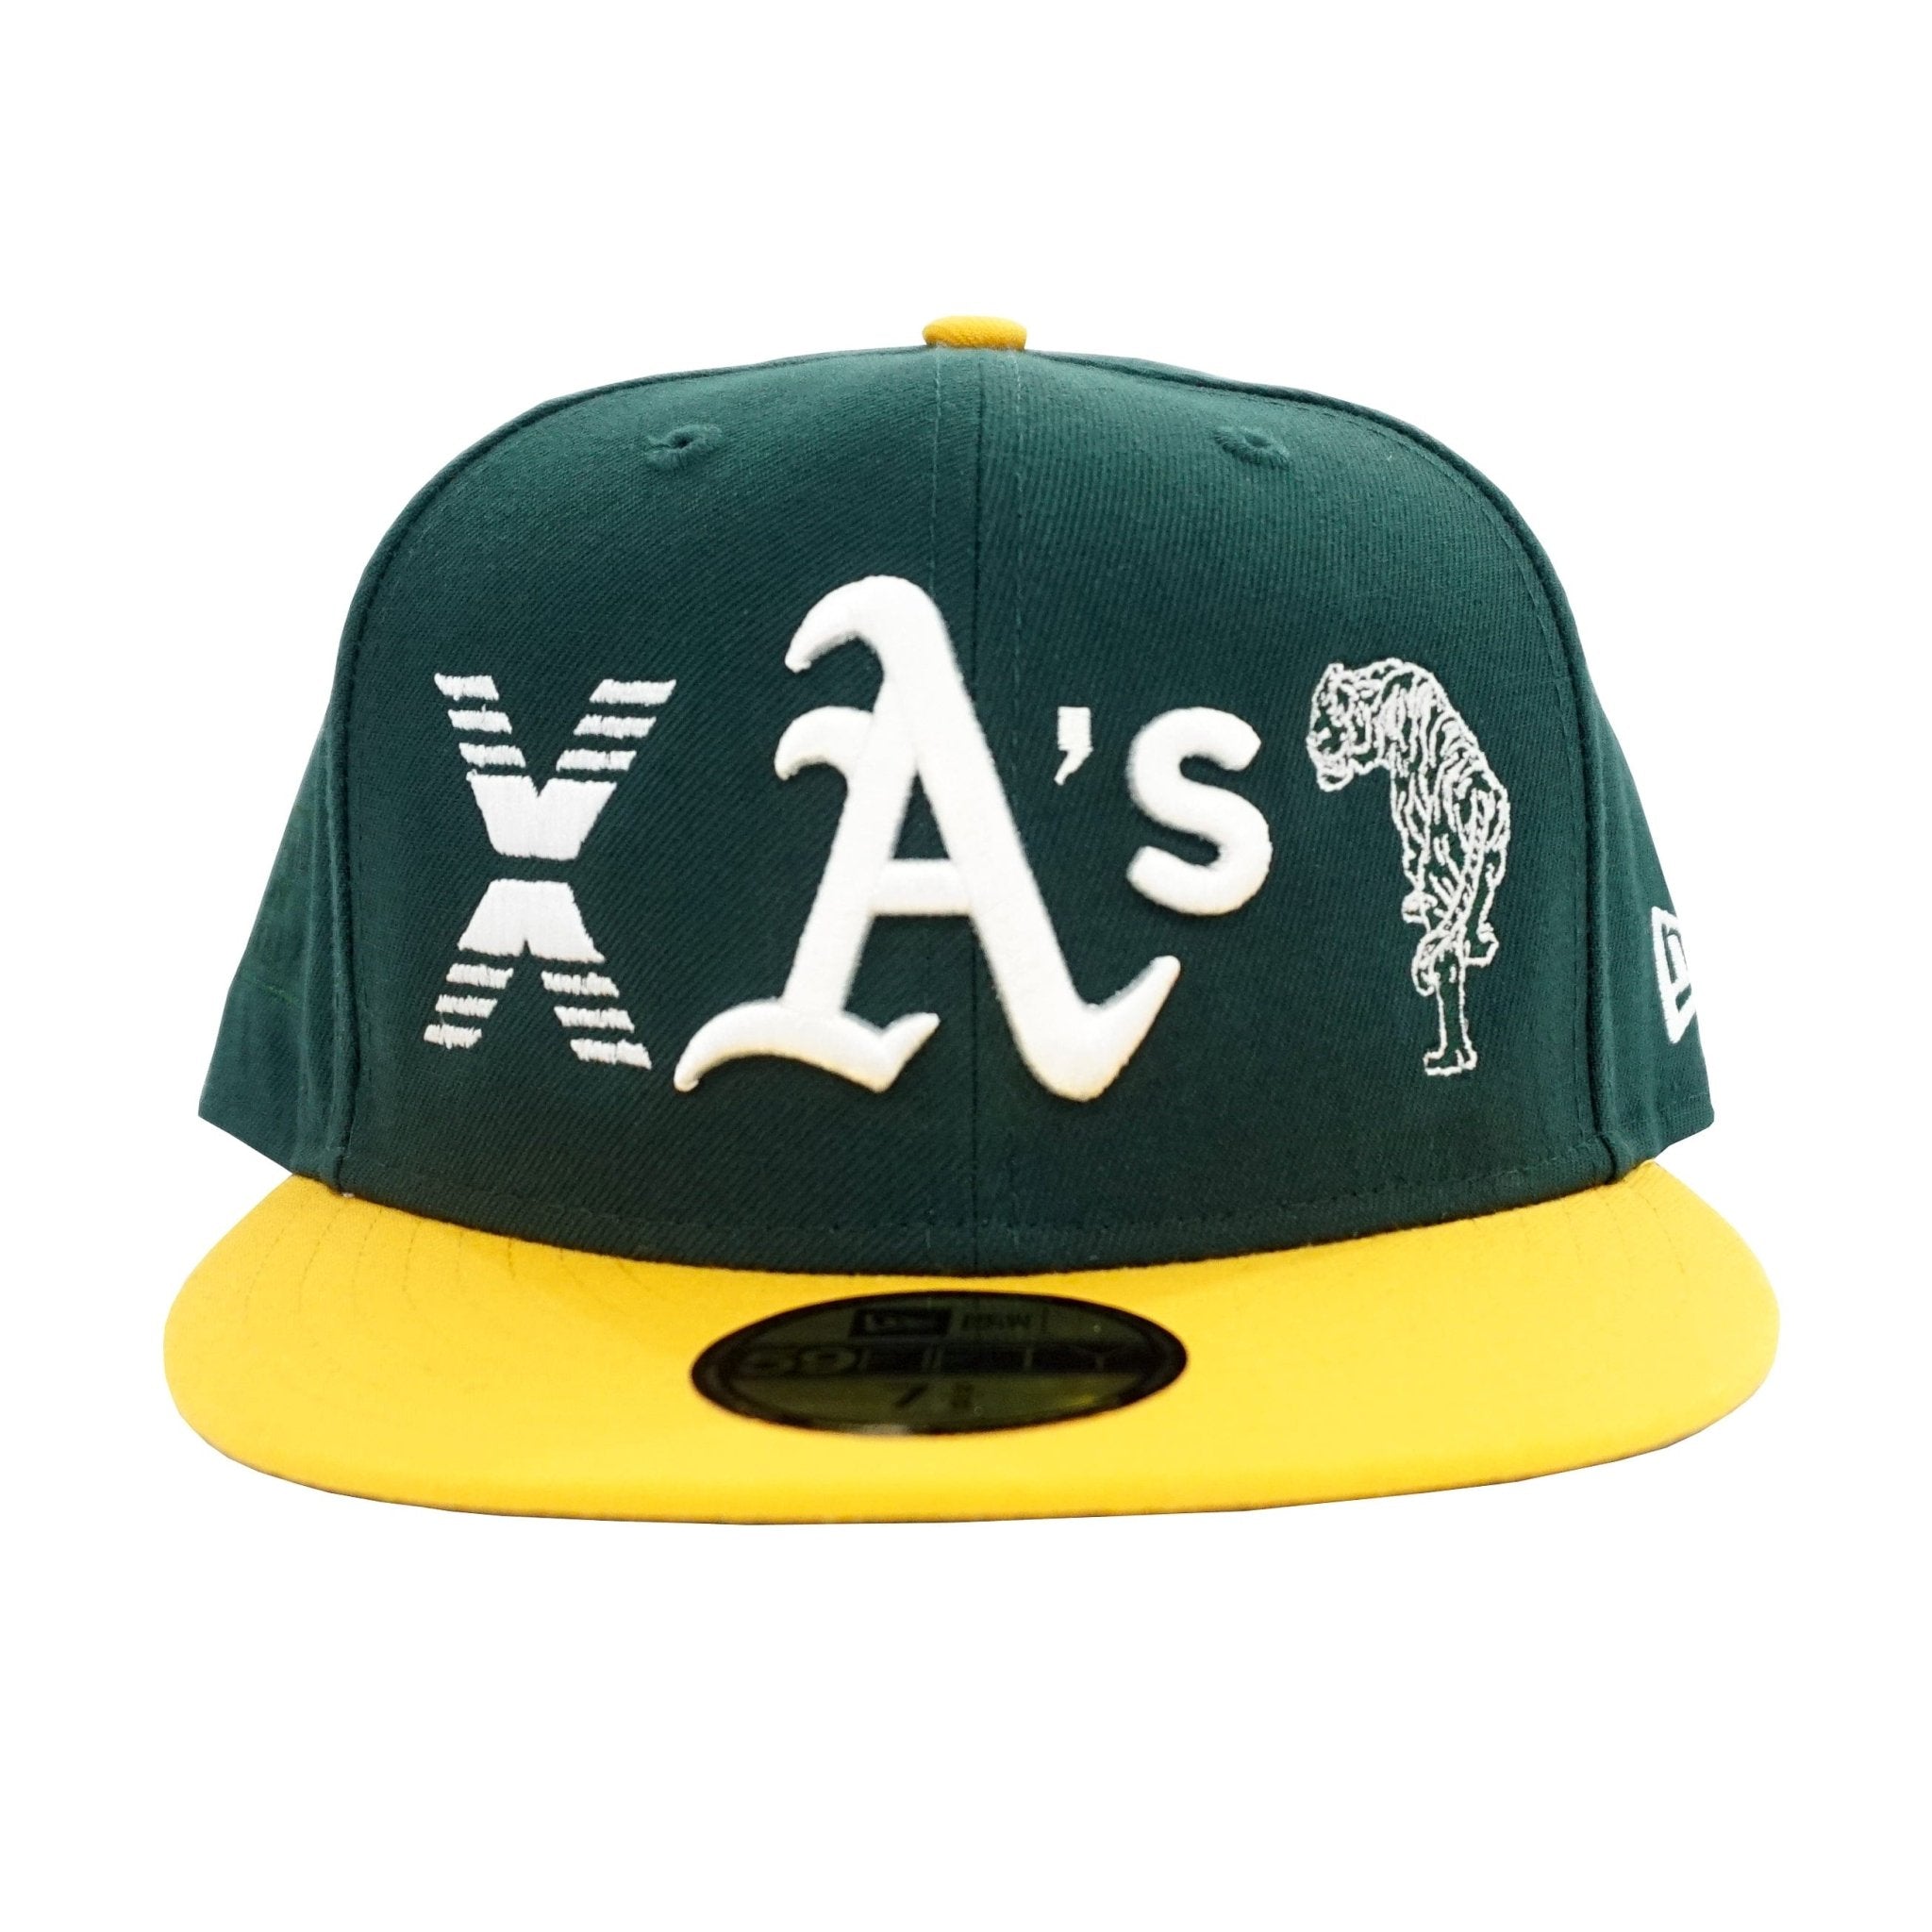 State Of Flux X New Era Oakland Athletics 59Fifty Fitted Hat in green and yellow